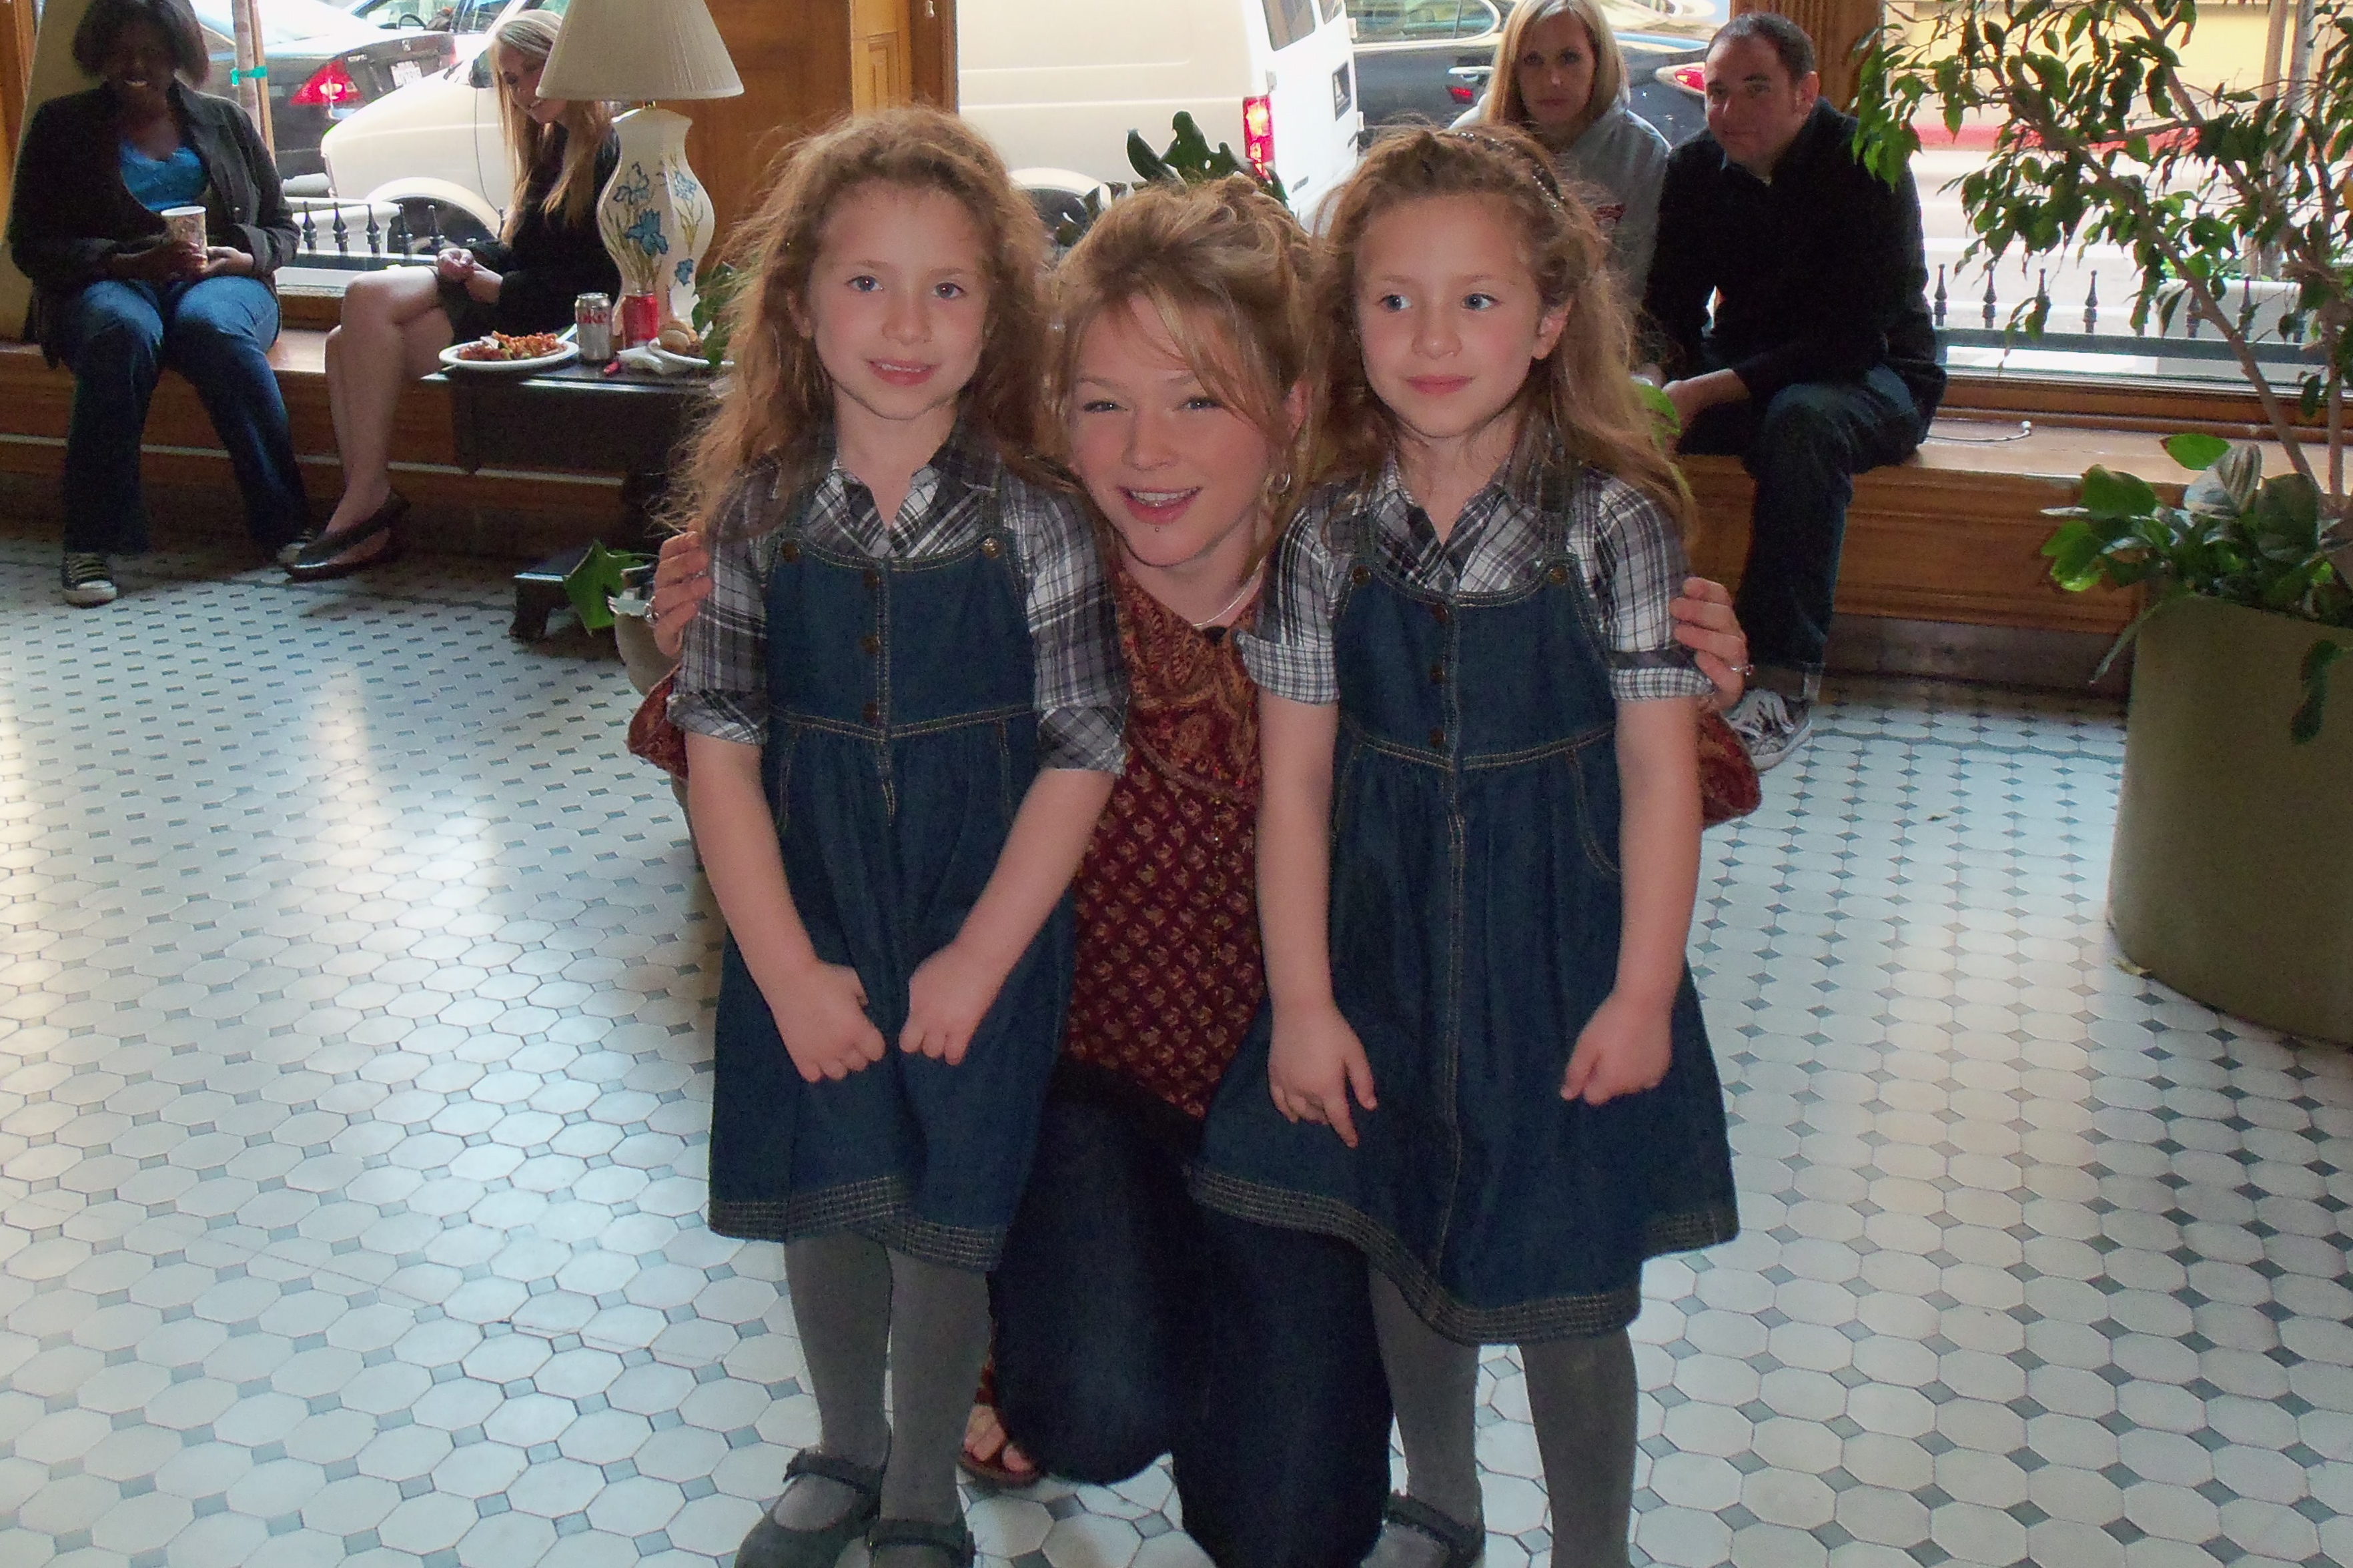 Chiara & Bianca with Crystal Bowersox on set of Crystal's new music video Nov 22 2010